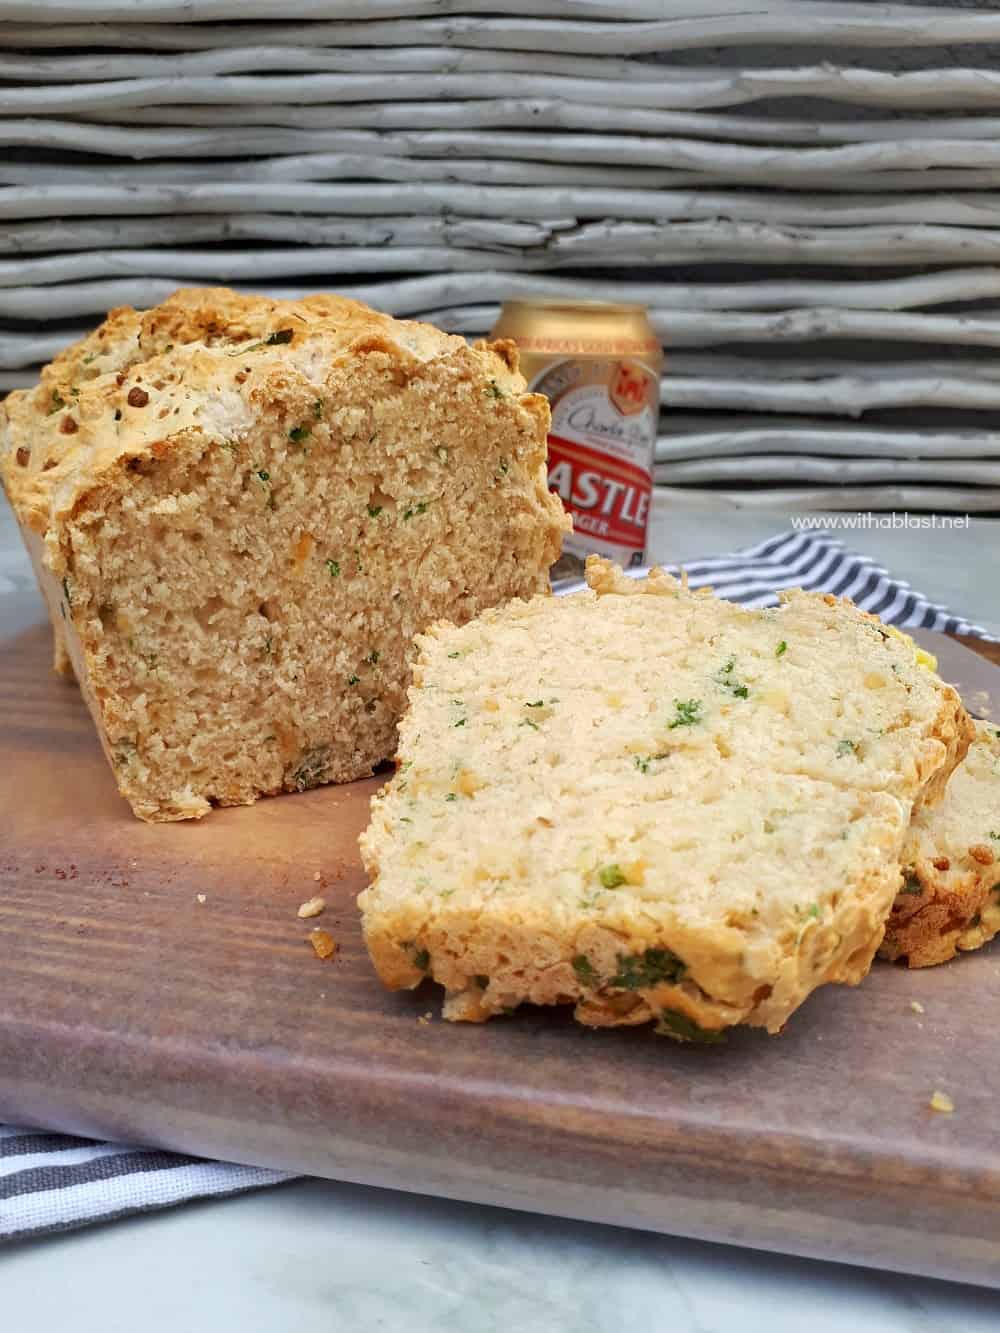 Tasty, quick and easy, mix and bake recipe for a Garlic and Parsley Beer Bread to serve as a side instead of dinner rolls or as a snack